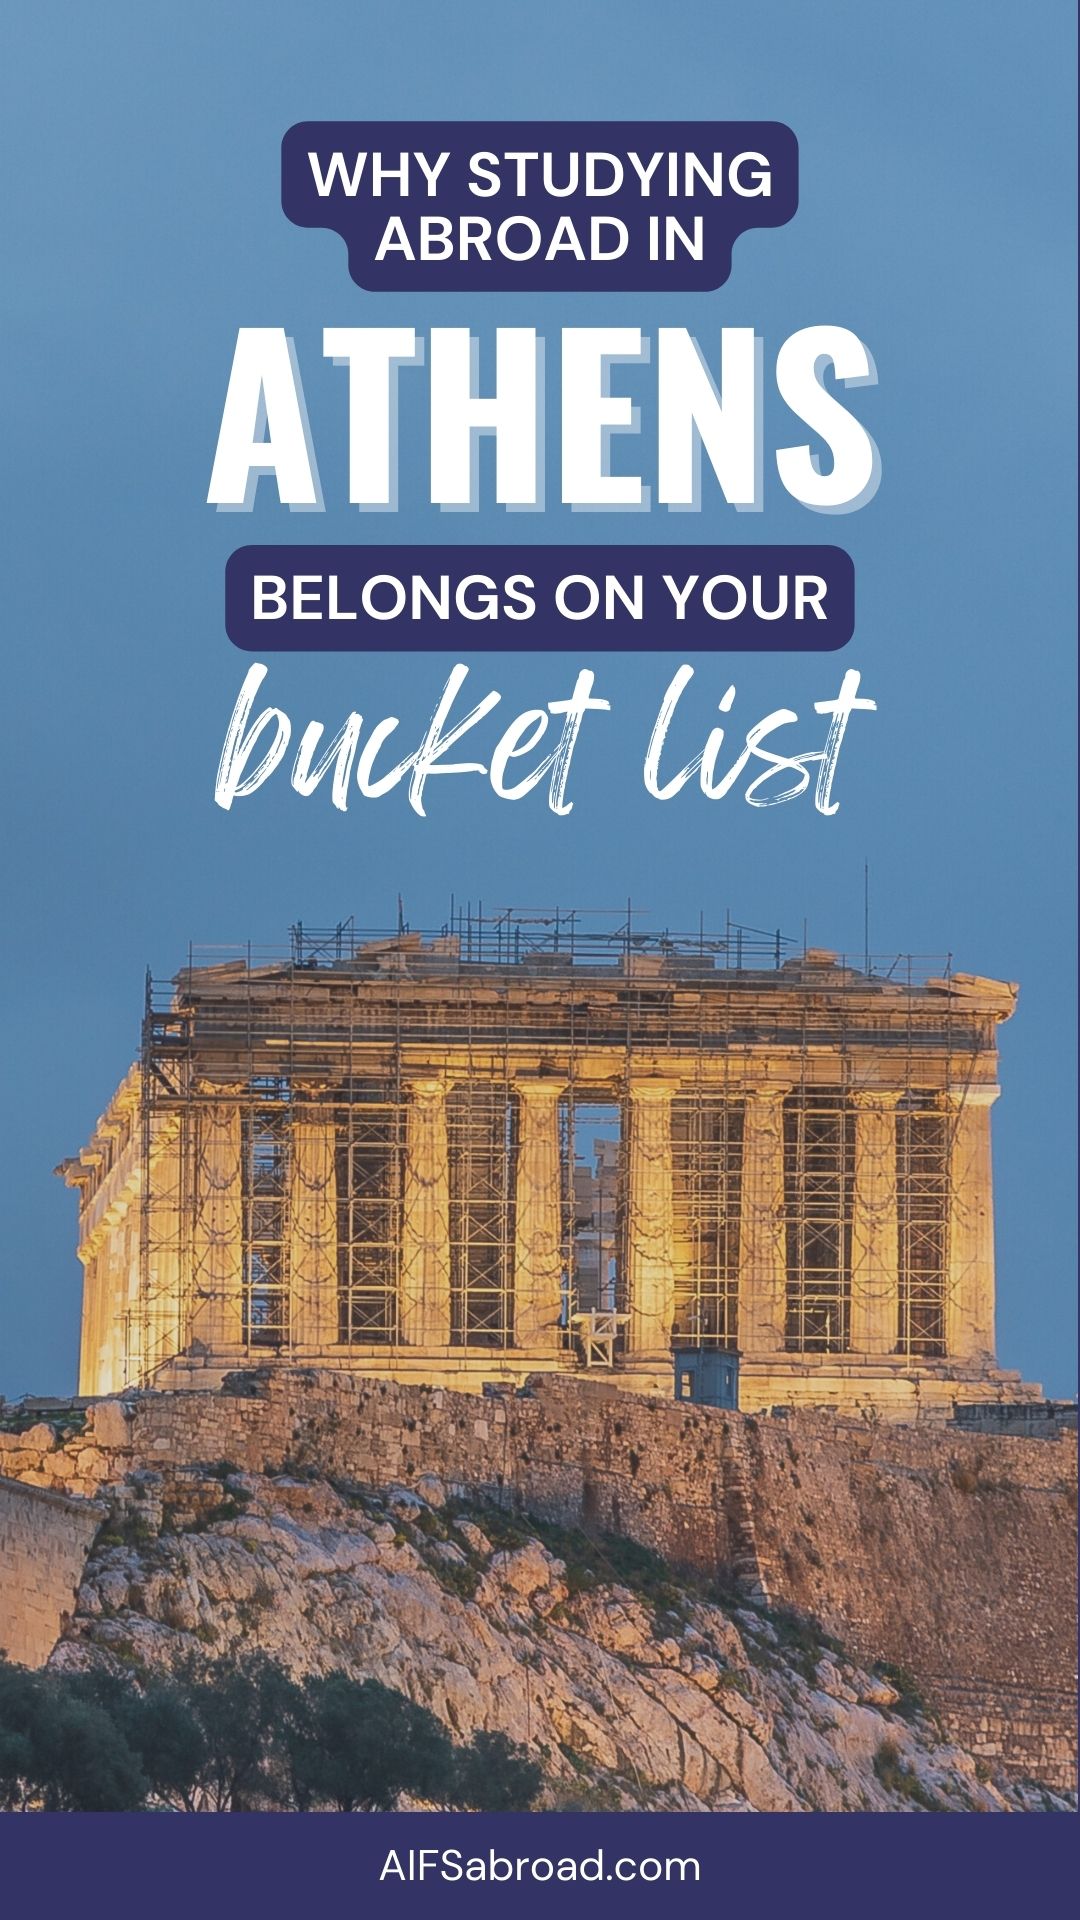 Image of Parthenon in Athens with text: Why studying abroad in Athens, Greece belongs on your bucket list